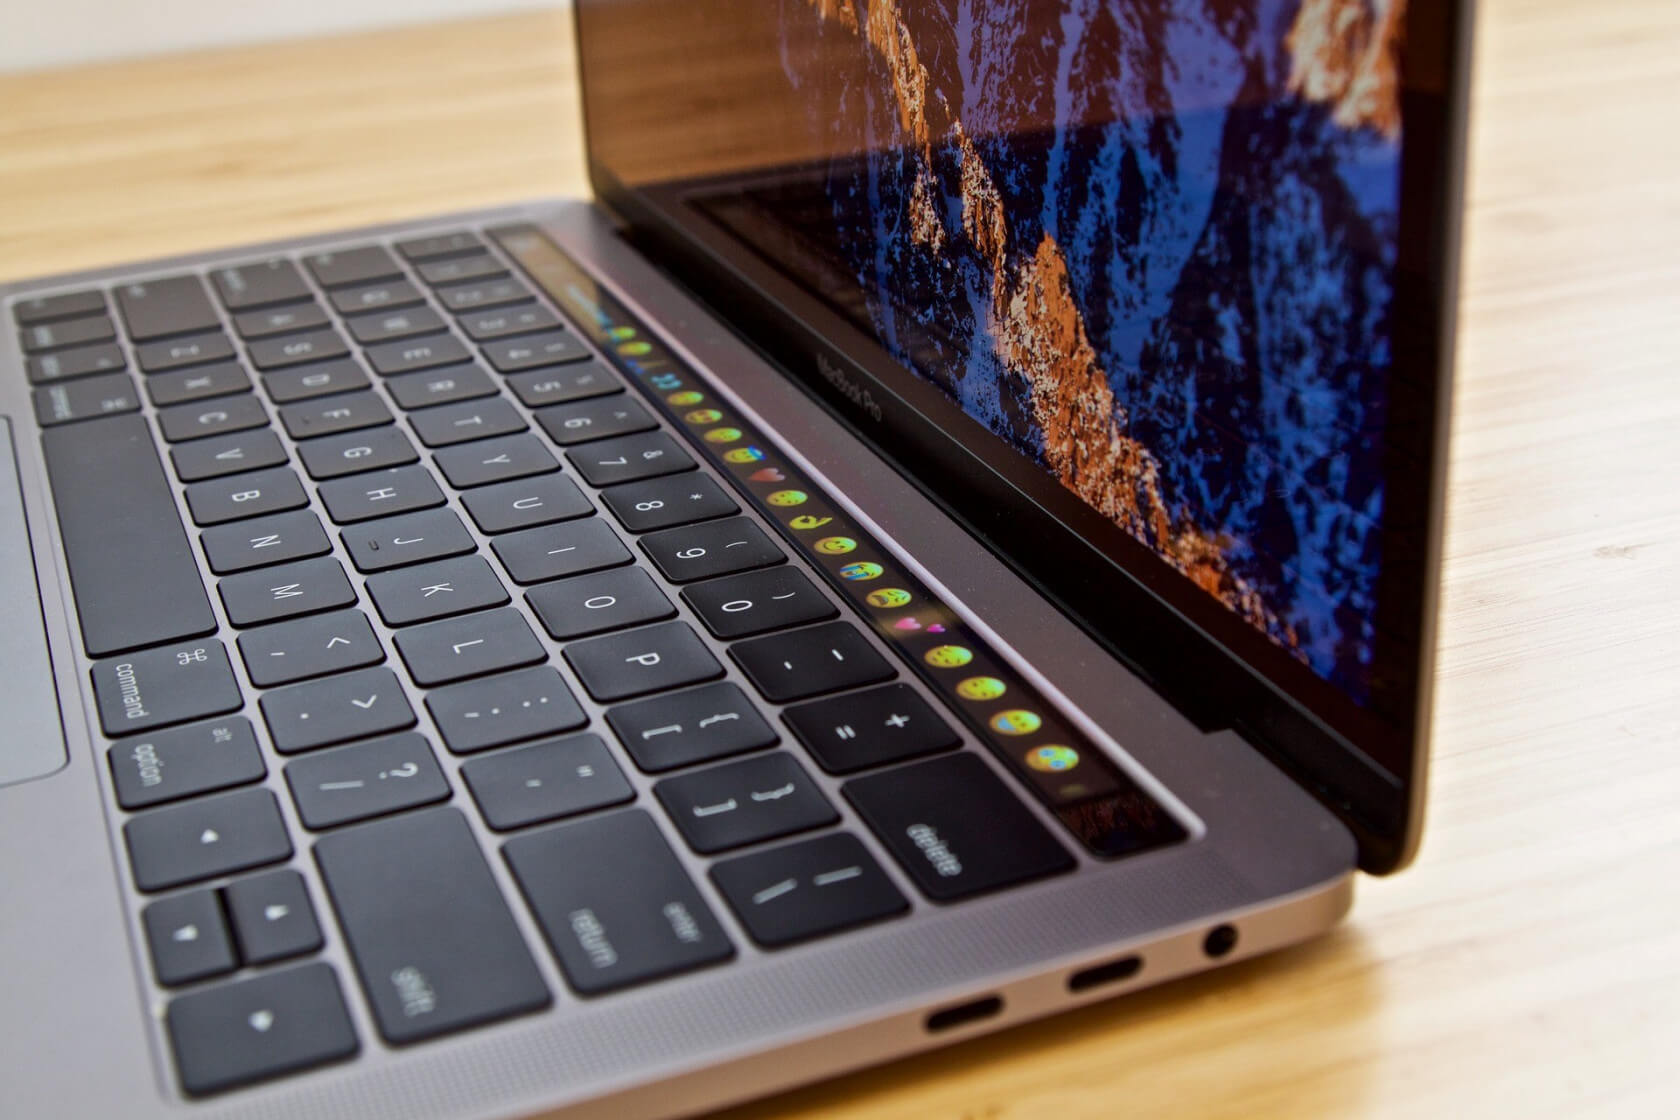 Apple's MacBooks rumored to receive changes this year; 13-inch Retina MacBook to launch in June